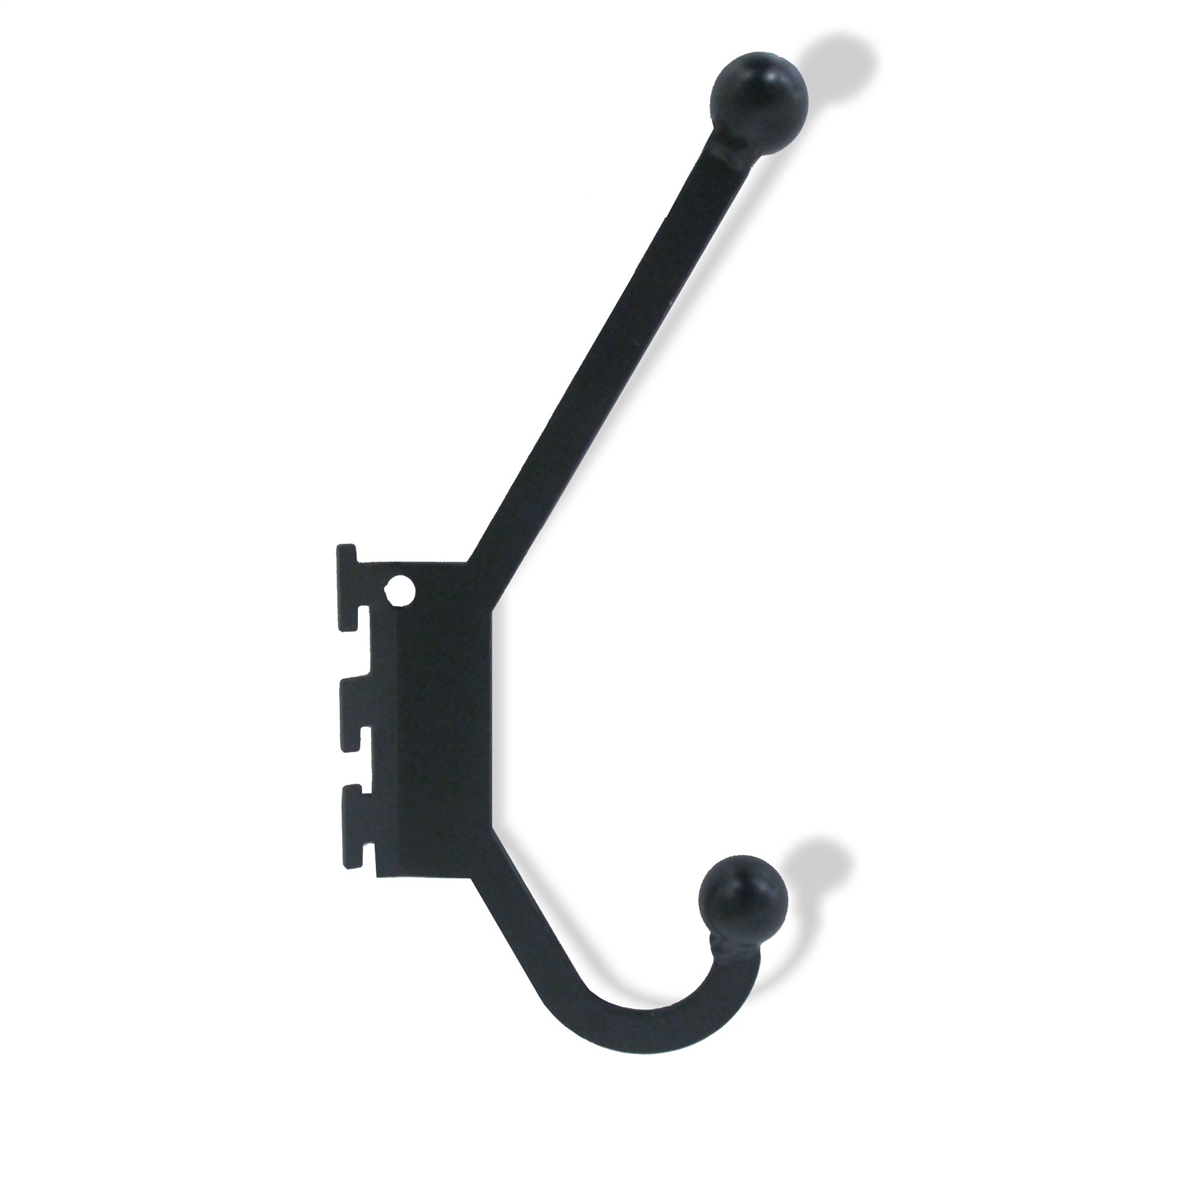 Coat hook for mounting in cubicle slotted hanger frame 1" on center